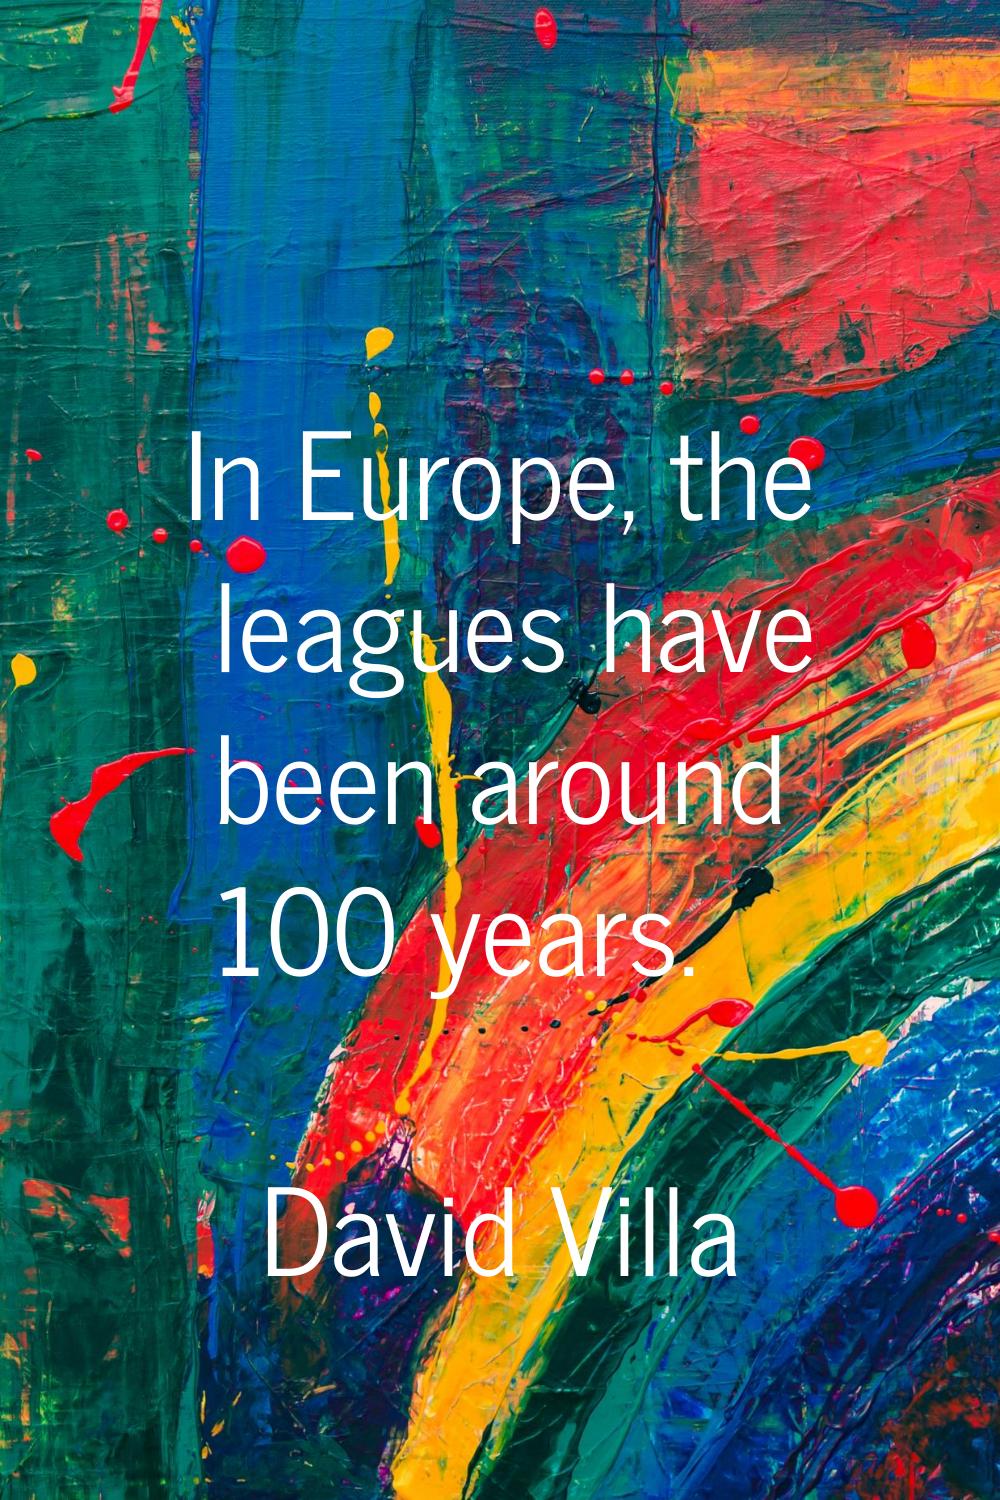 In Europe, the leagues have been around 100 years.